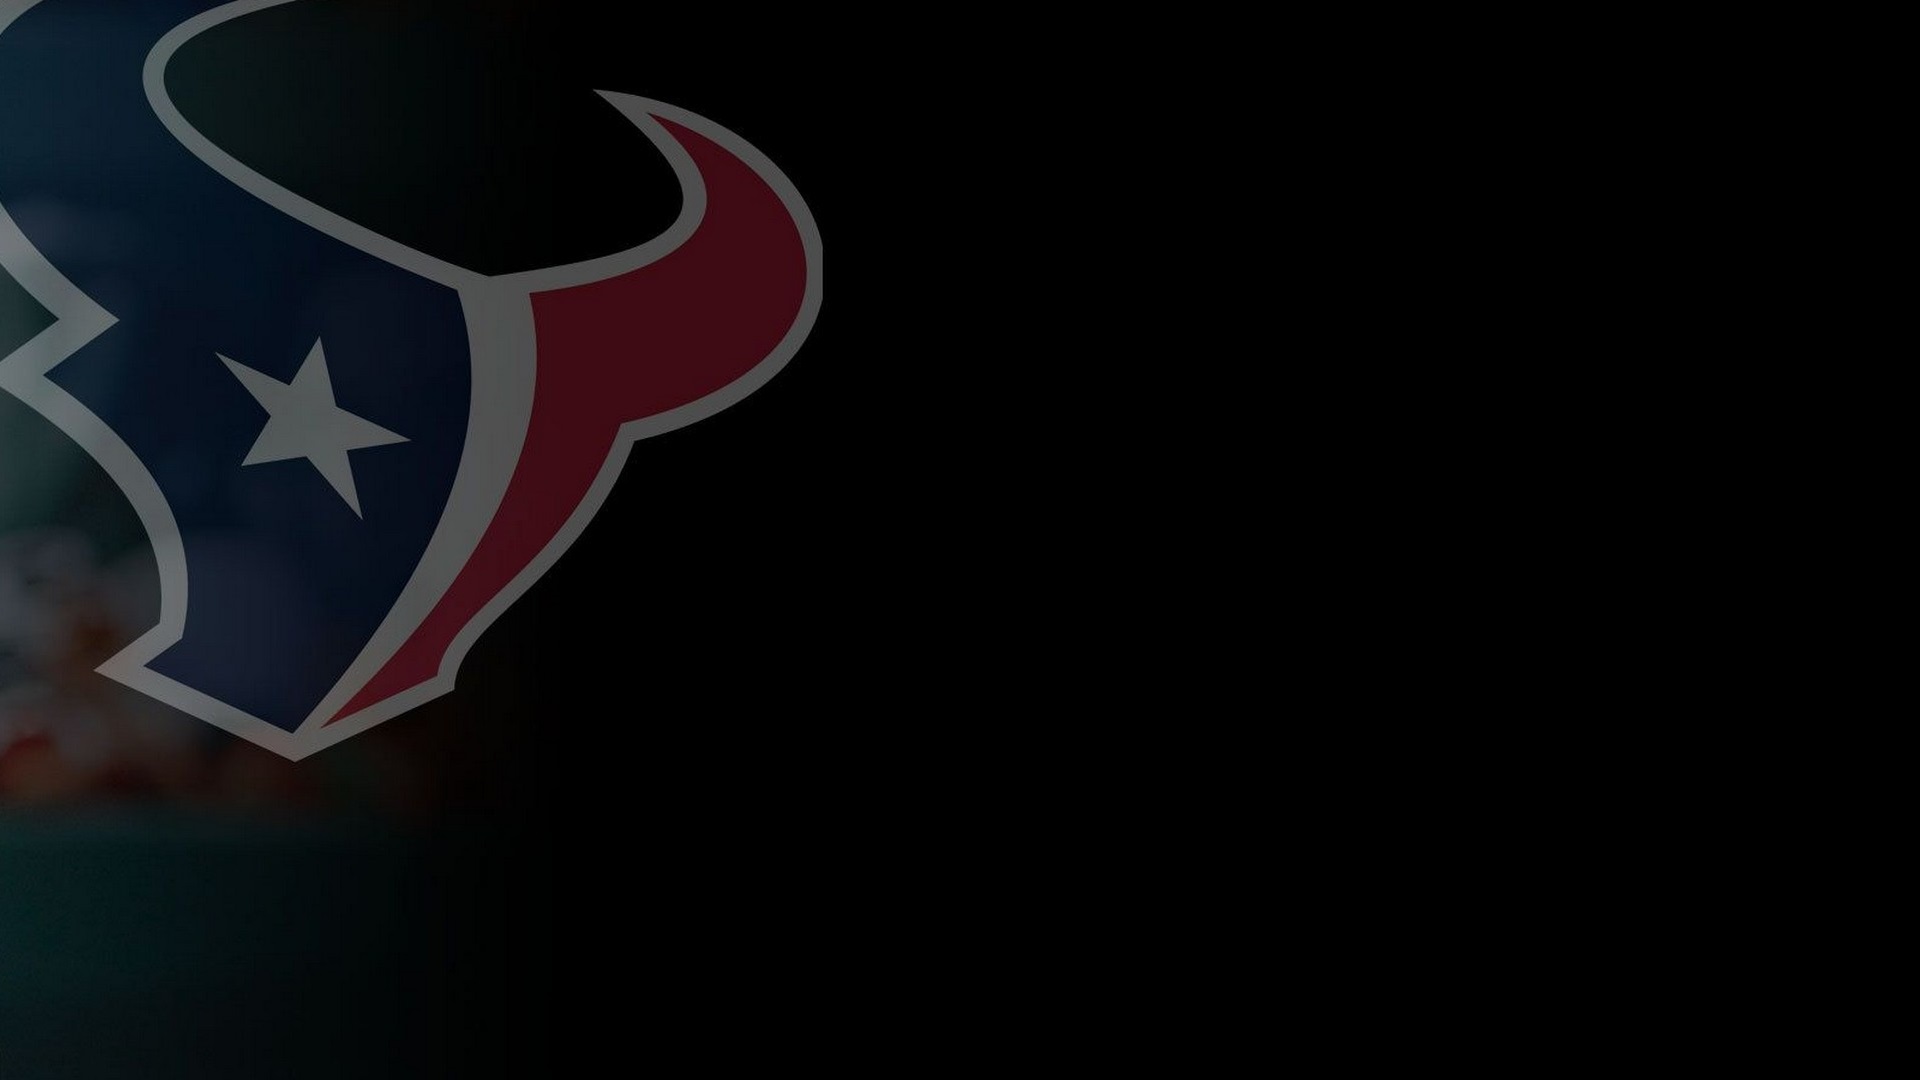 Houston Texans Wallpaper For Mac OS with high-resolution 1920x1080 pixel. Download and set as wallpaper for Desktop Computer, Apple iPhone X, XS Max, XR, 8, 7, 6, SE, iPad, Android